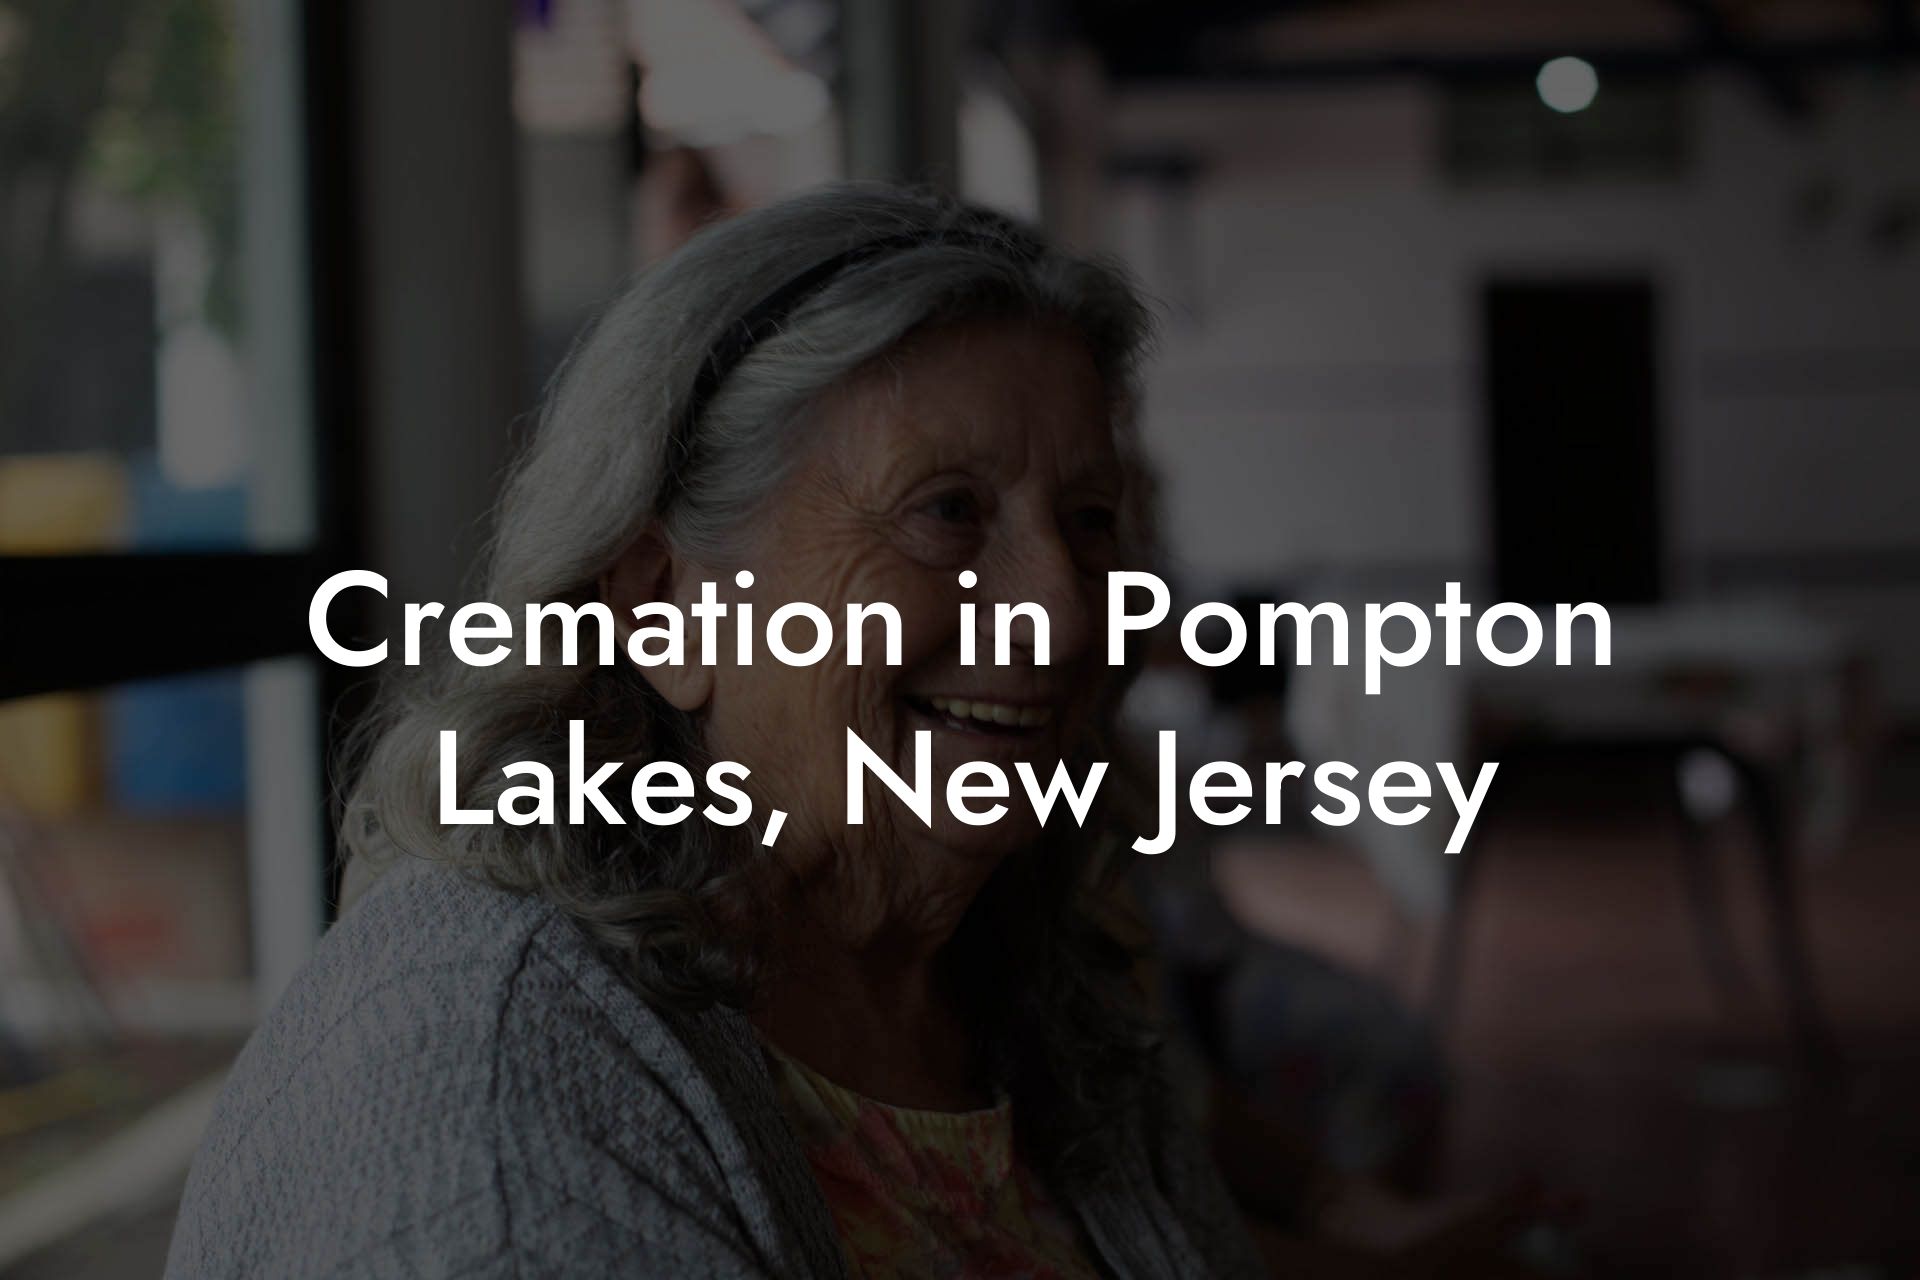 Cremation in Pompton Lakes, New Jersey